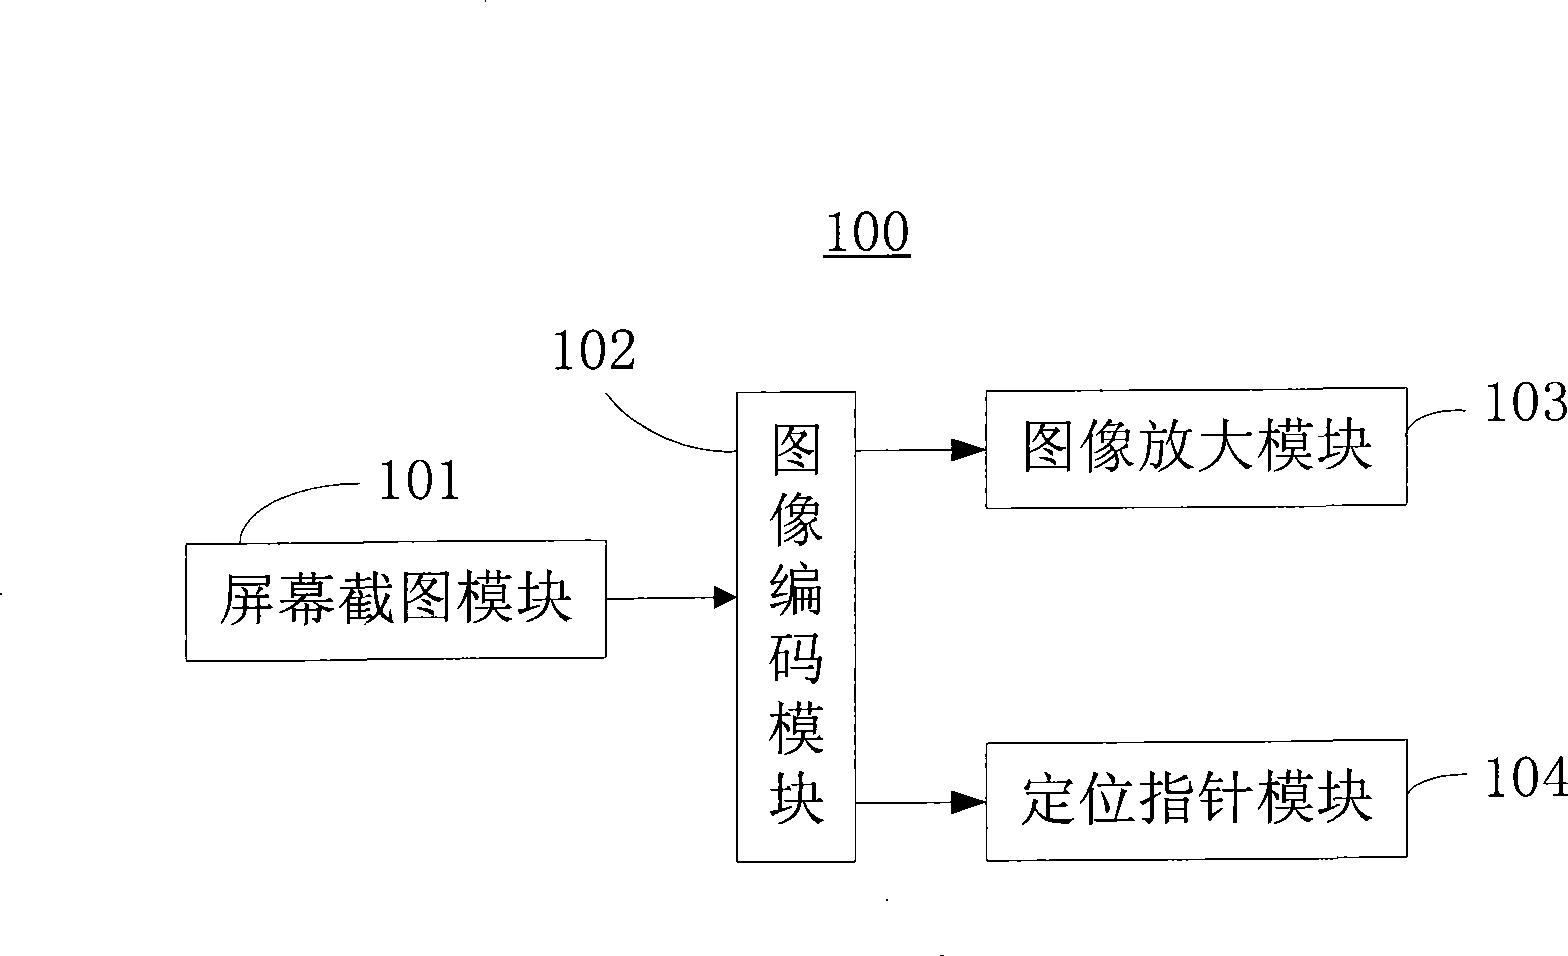 Screen capturing method and system